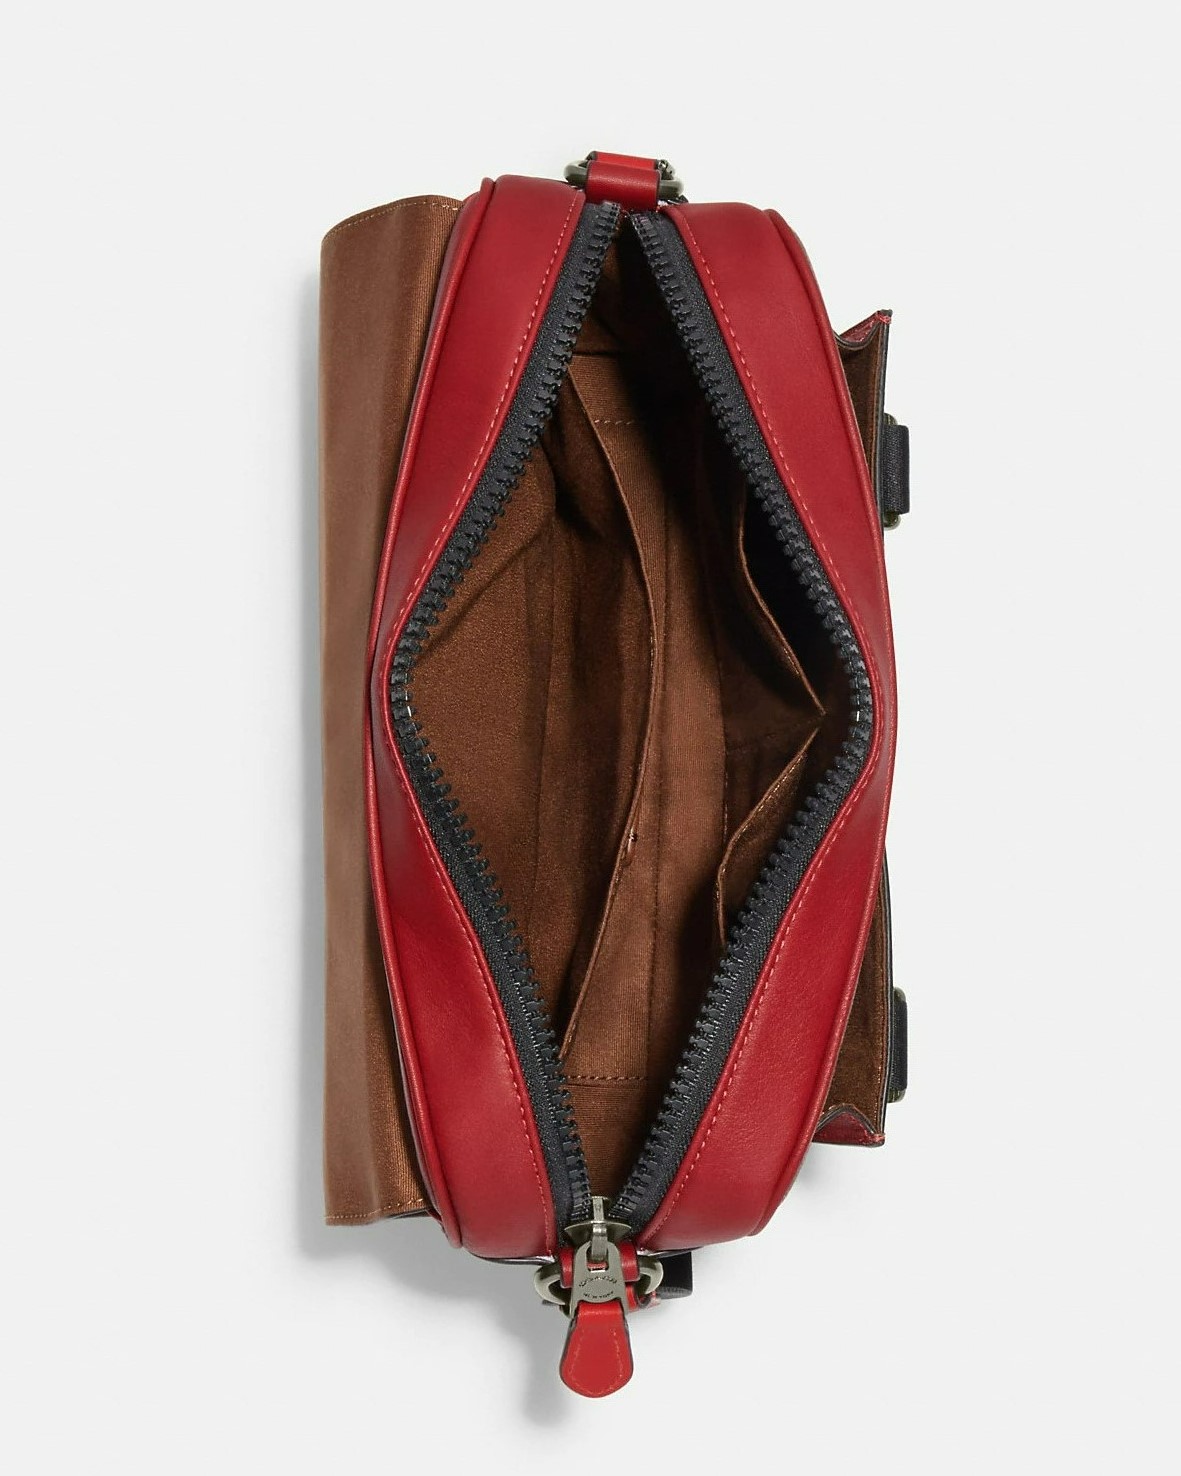 TÚI DÁNG CẶP COACH TRACK CROSSBODY IN RED KHAKI MULTI COLORBLOCK SIGNATURE CANVAS WITH COACH STAMP 5